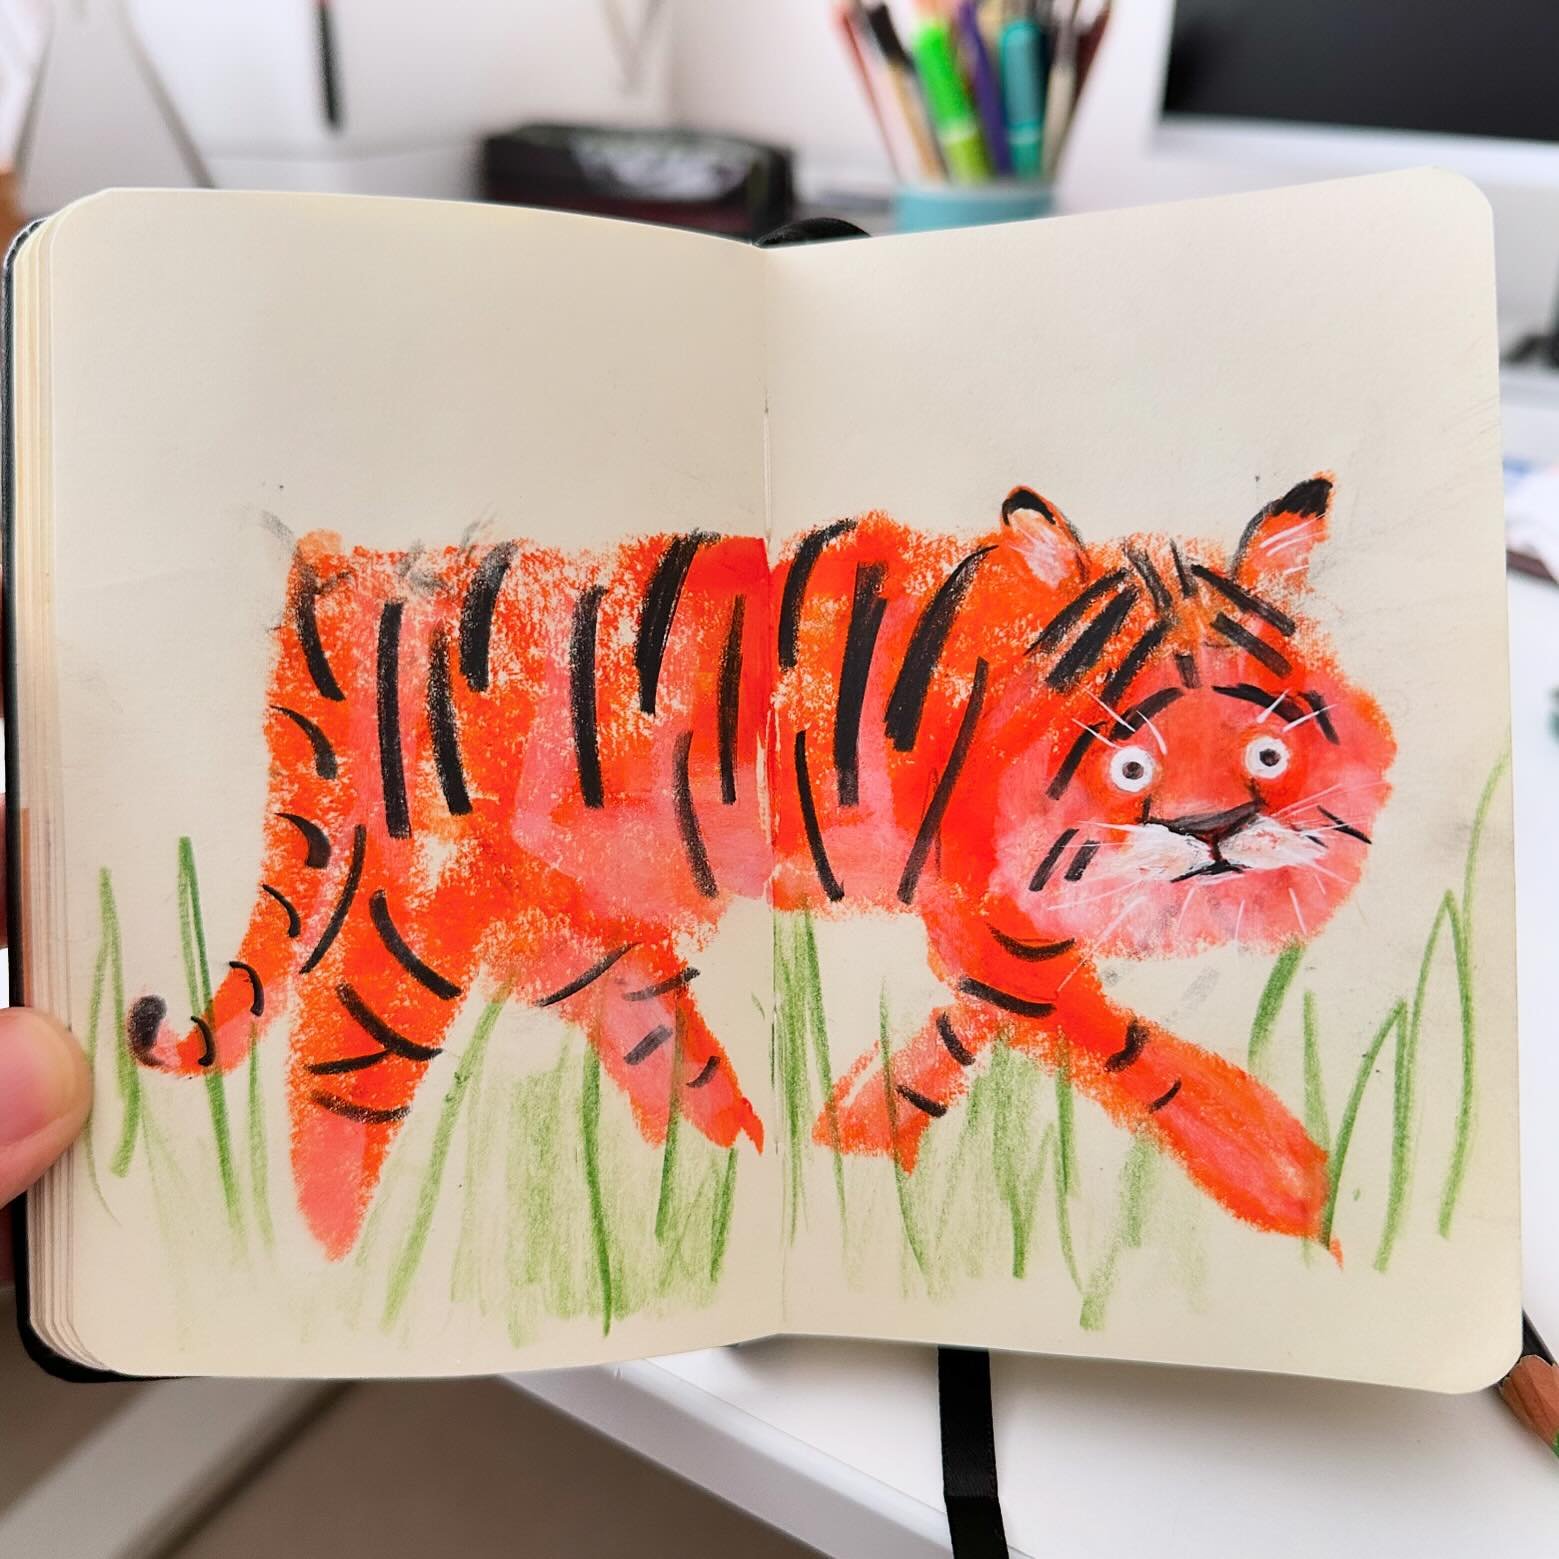 Watch out, there&rsquo;s a tiger about!
&bull;
&bull;
&bull;
#sketching #sketchbook #paintstick #pencil #sketchbook #tigerillustration #royaltalenssketchbook